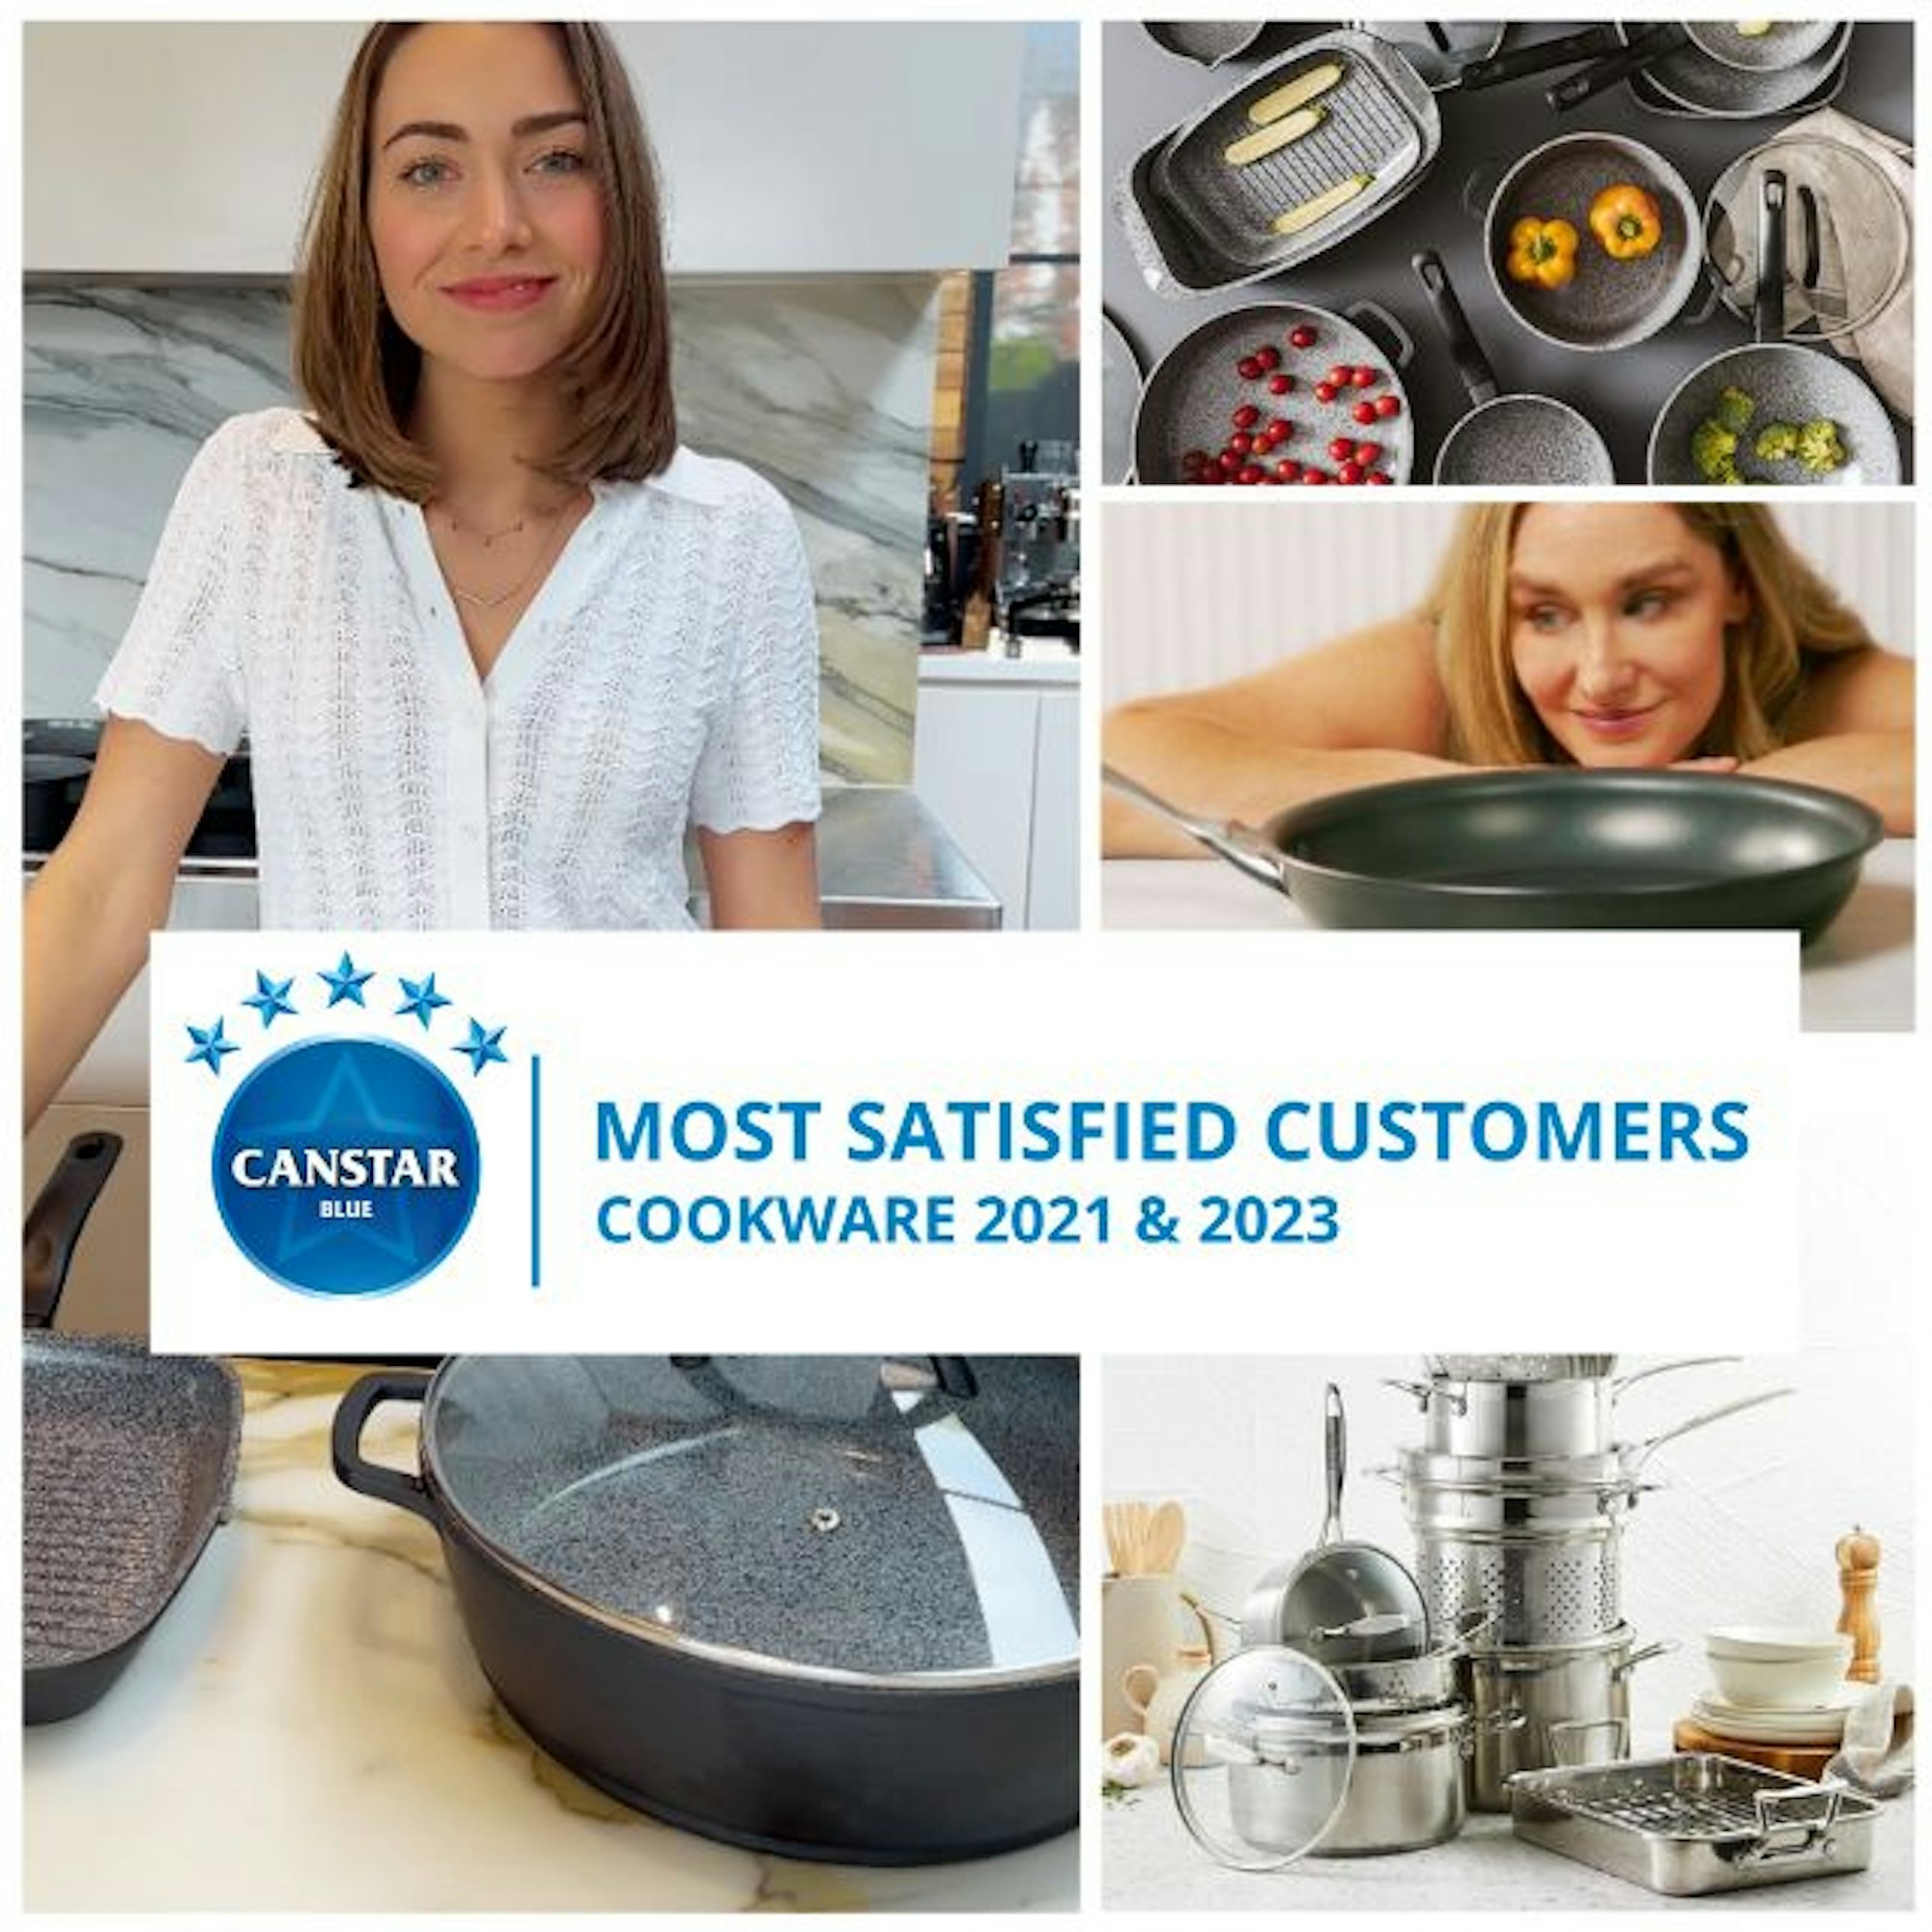 Most Satisfied Customers - Cookware 2021 & 2023